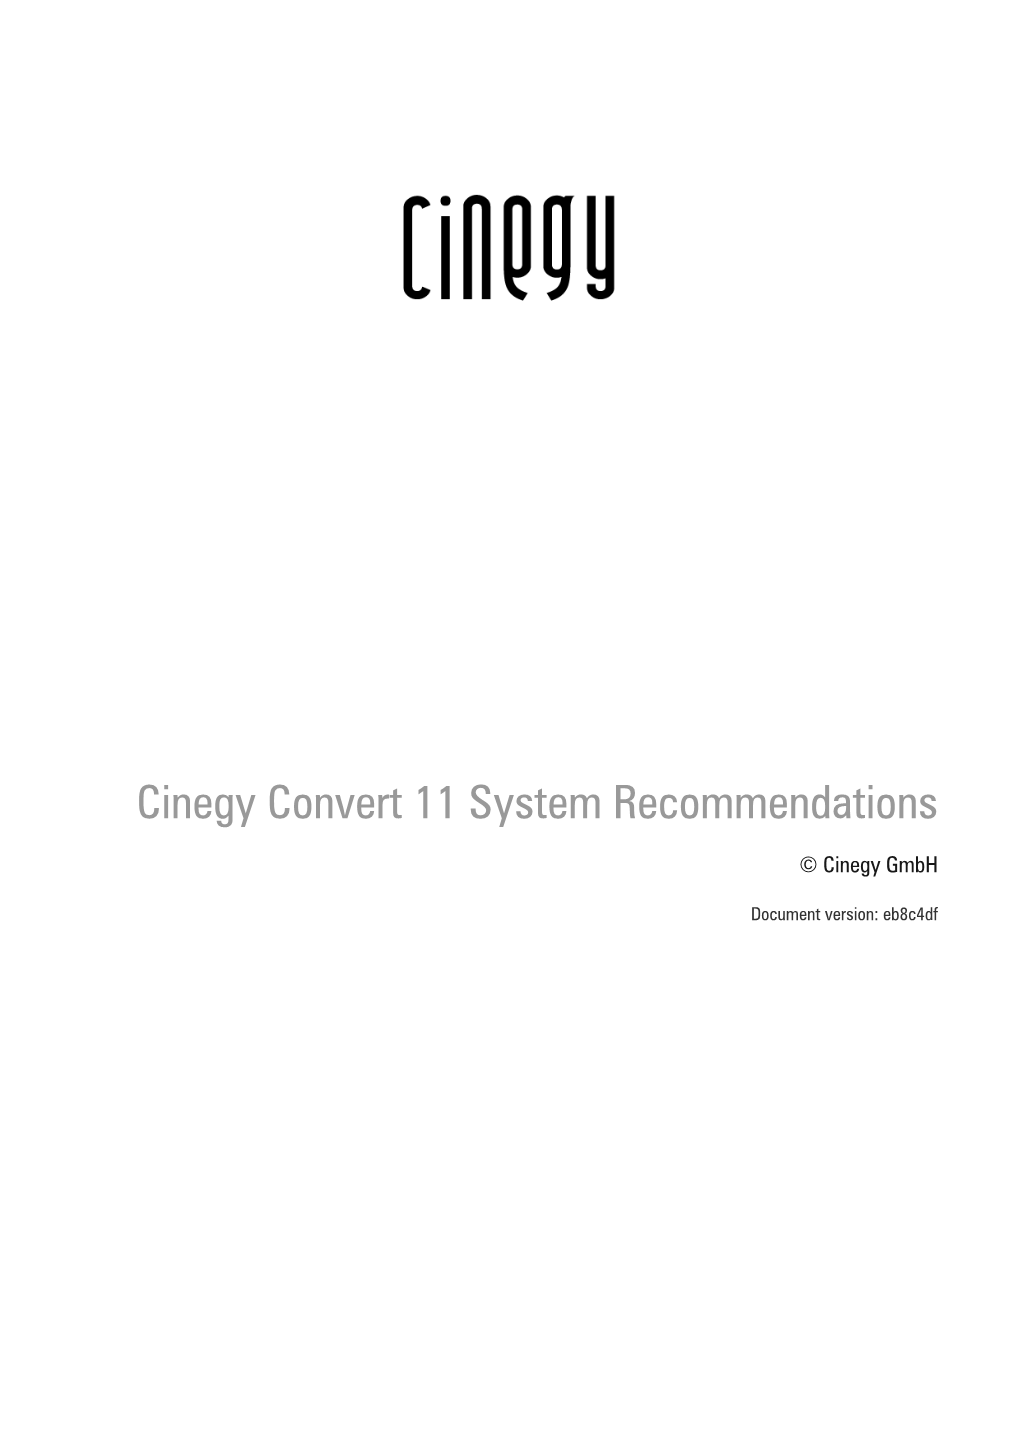 Cinegy Convert 11 System Recommendations